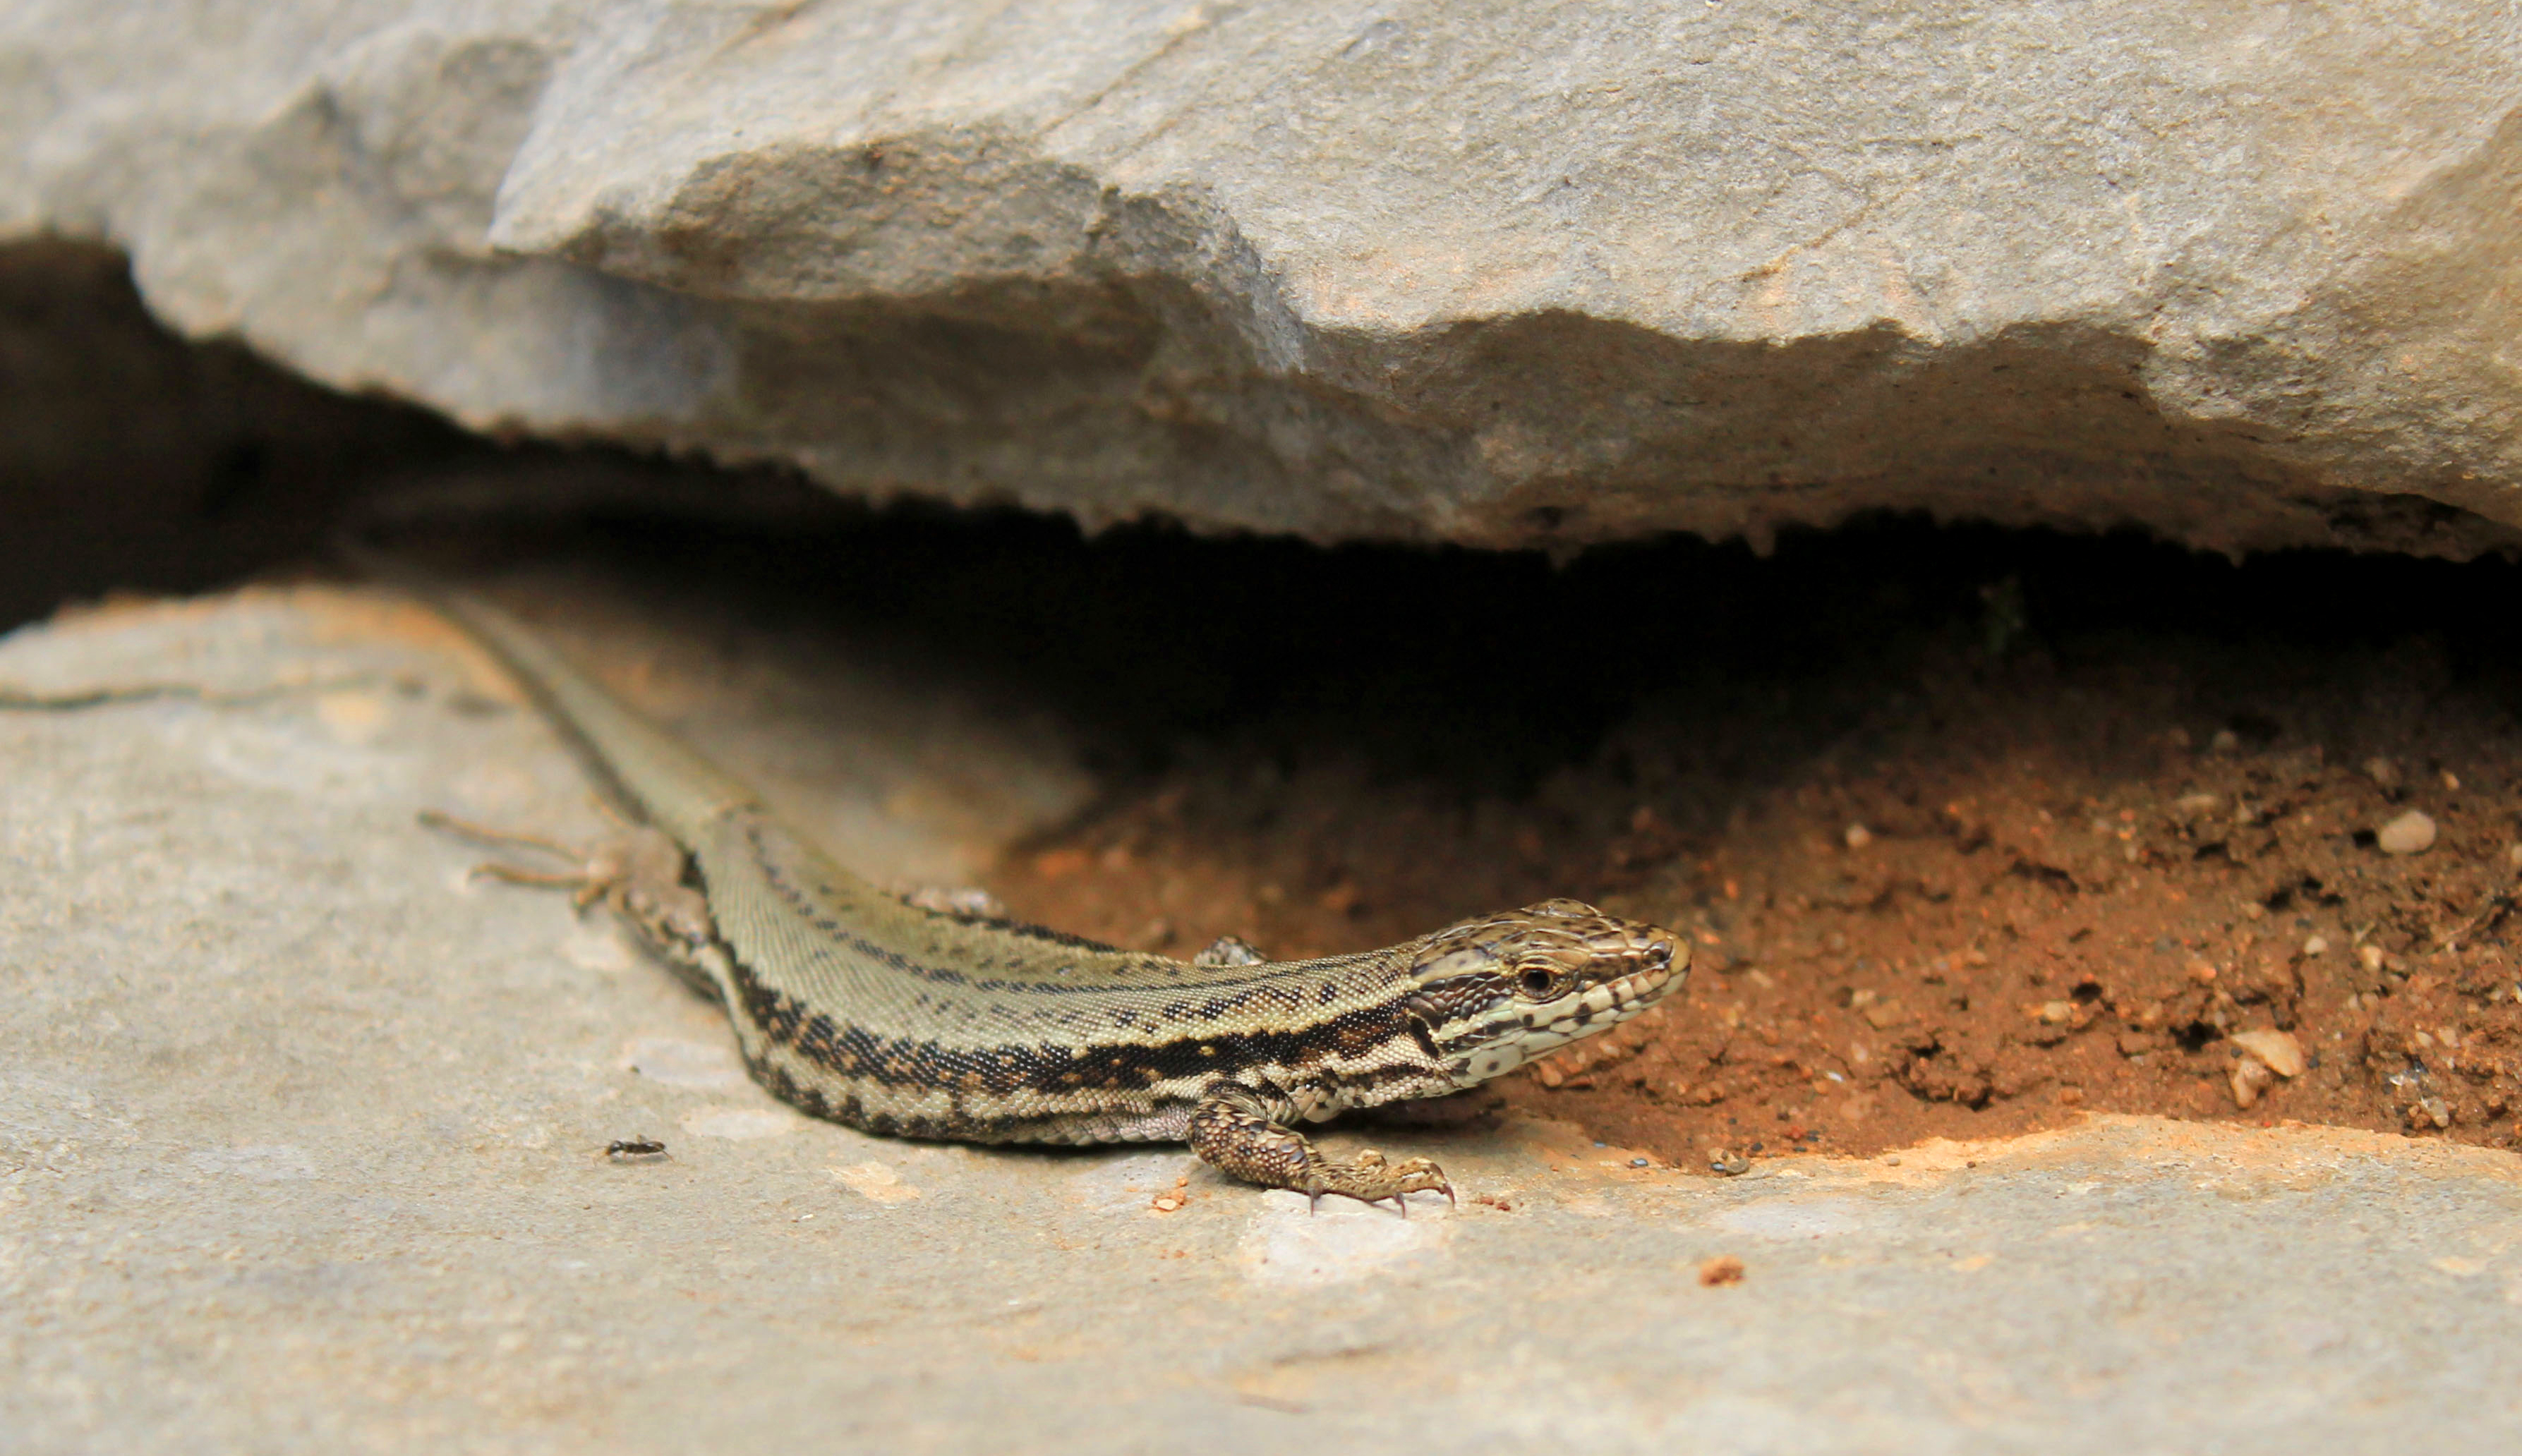 One of the few photographs I managed to get before he slithered back underneath the rock